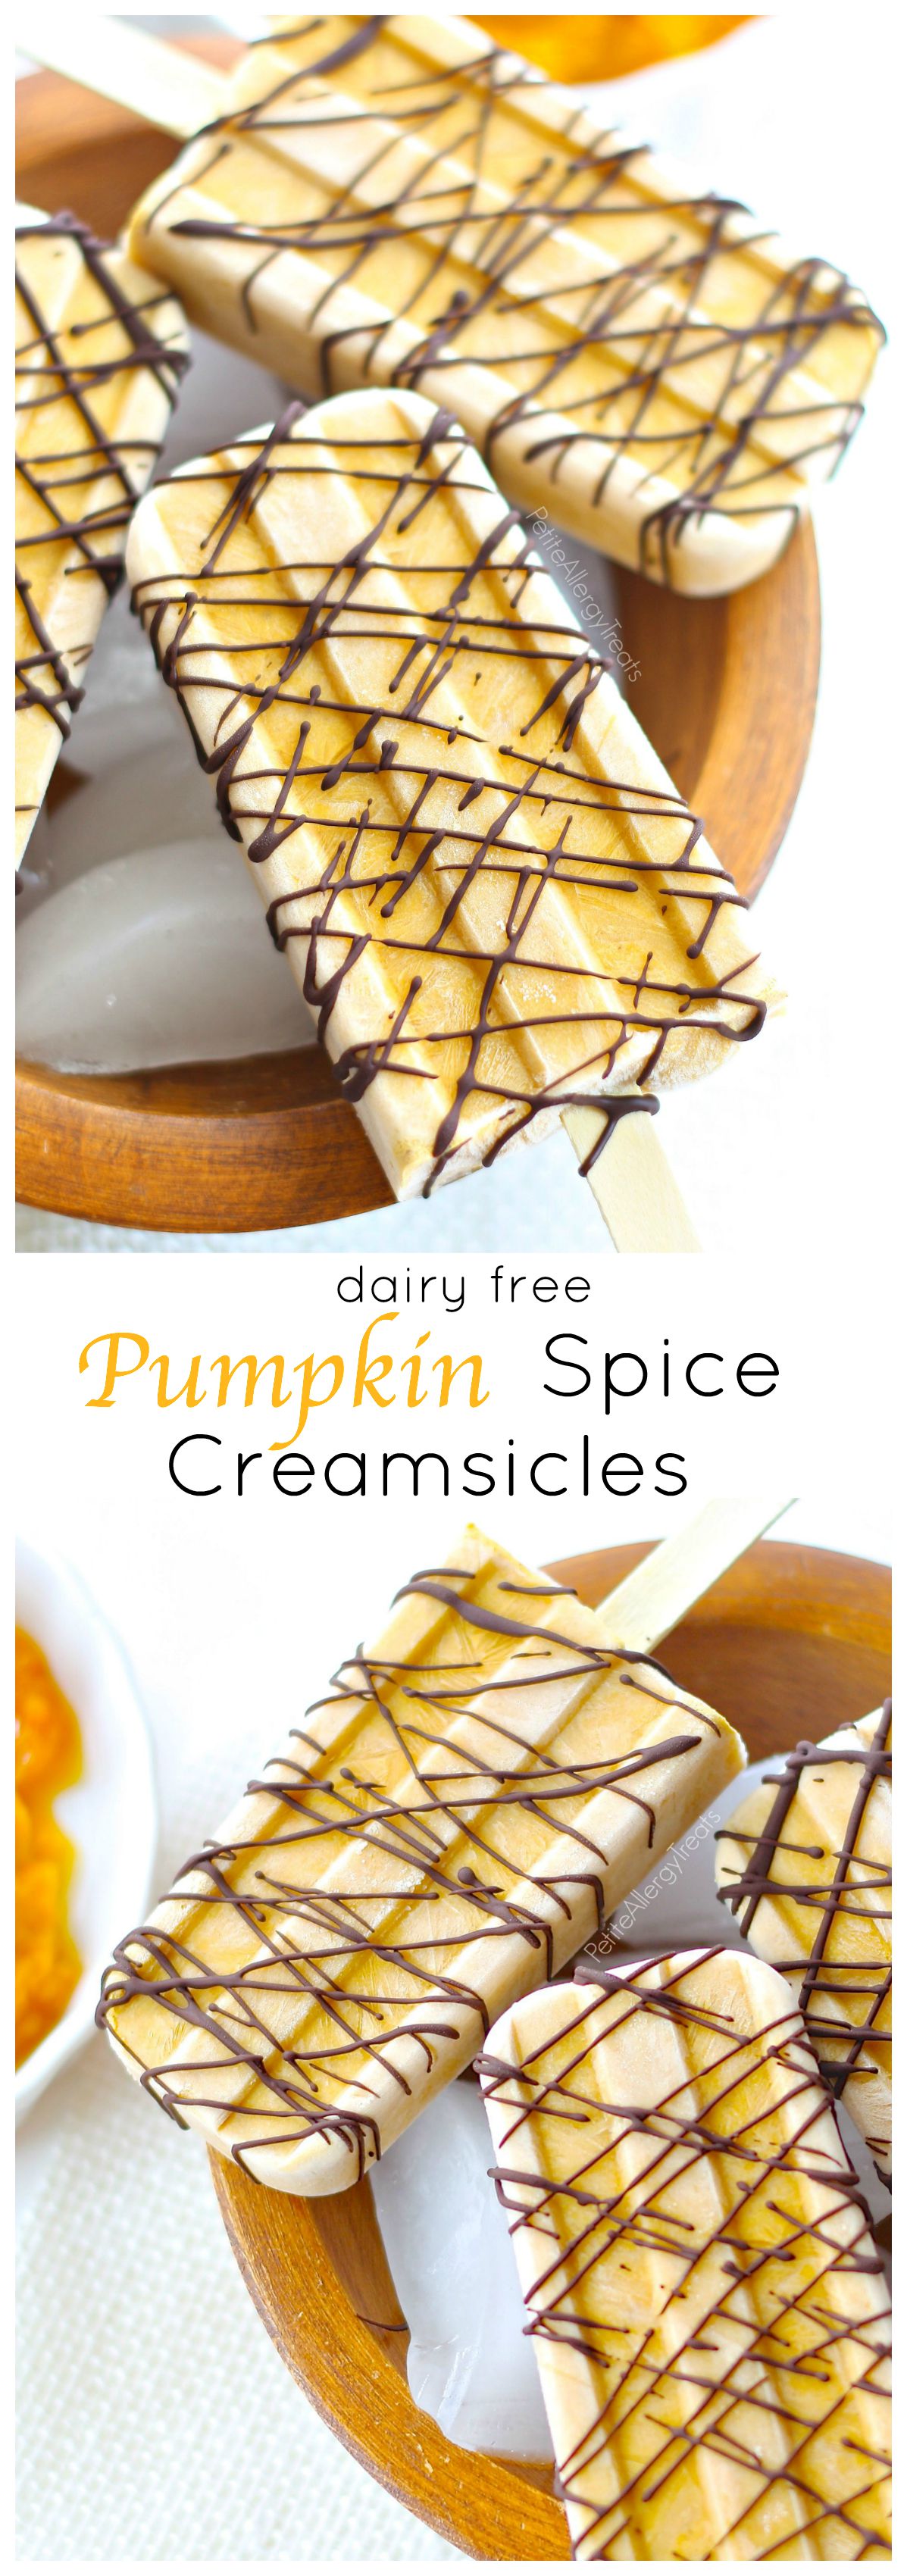 Pumpkin Pie Popsicles (dairy free Creamsicle)- It's pumpkin pie on a stick! For all pumpkin spice lovers!